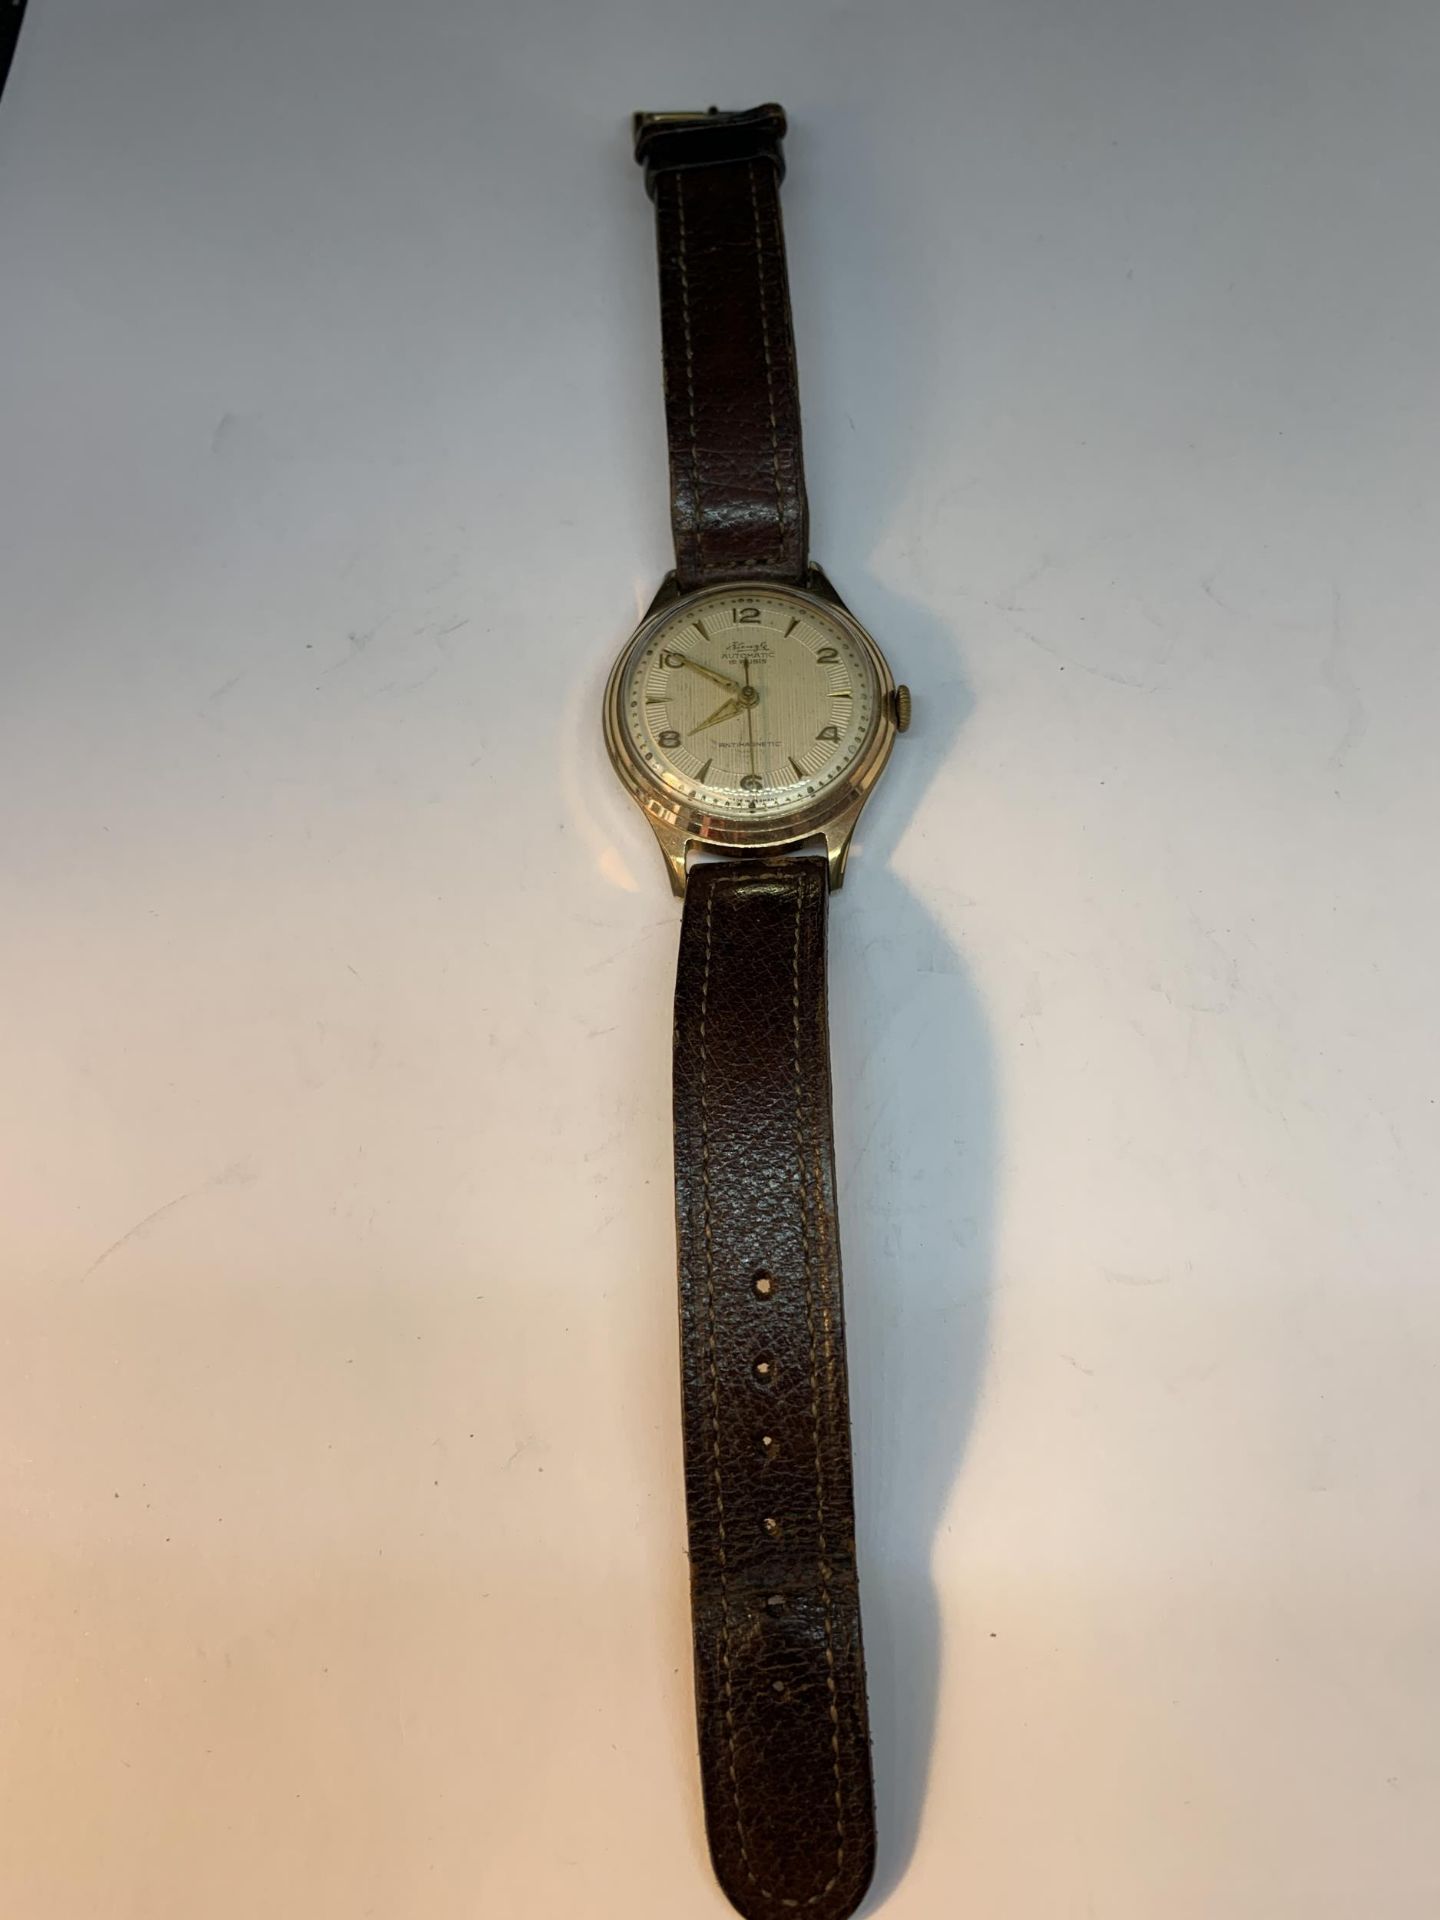 A VINTAGE KIENZLE AUTOMATIC 19 RUBIS ANTIMAGNETIC WRIST WATCH WITH BROWN LEATHER STRAP SEEN